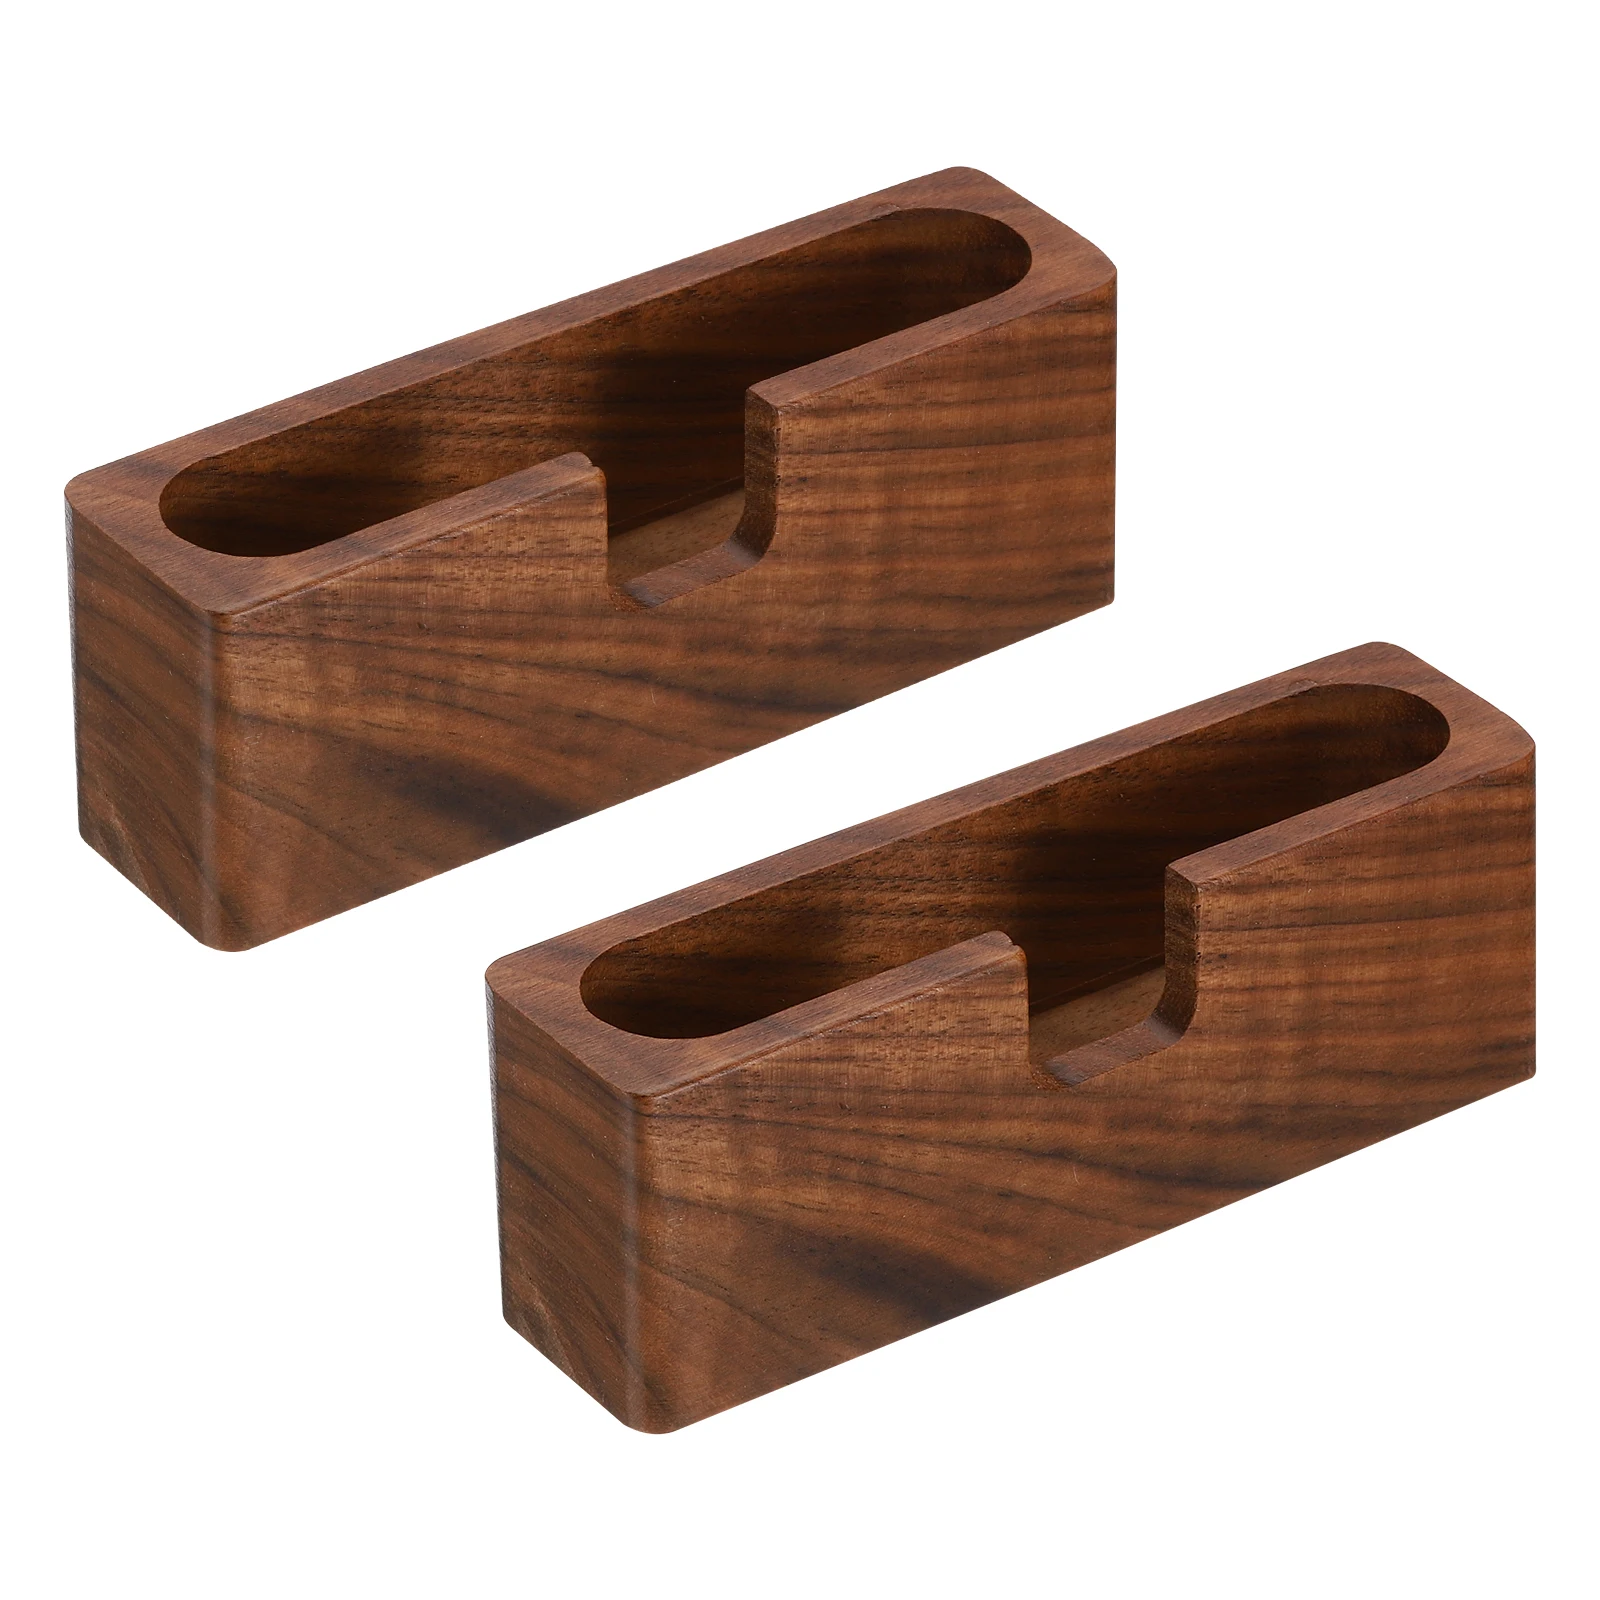 

2Pcs Wood Desktop Business Card Holder Square Wooden Card Stand Organizer Cards Display for Office Exhibition Office Supplies